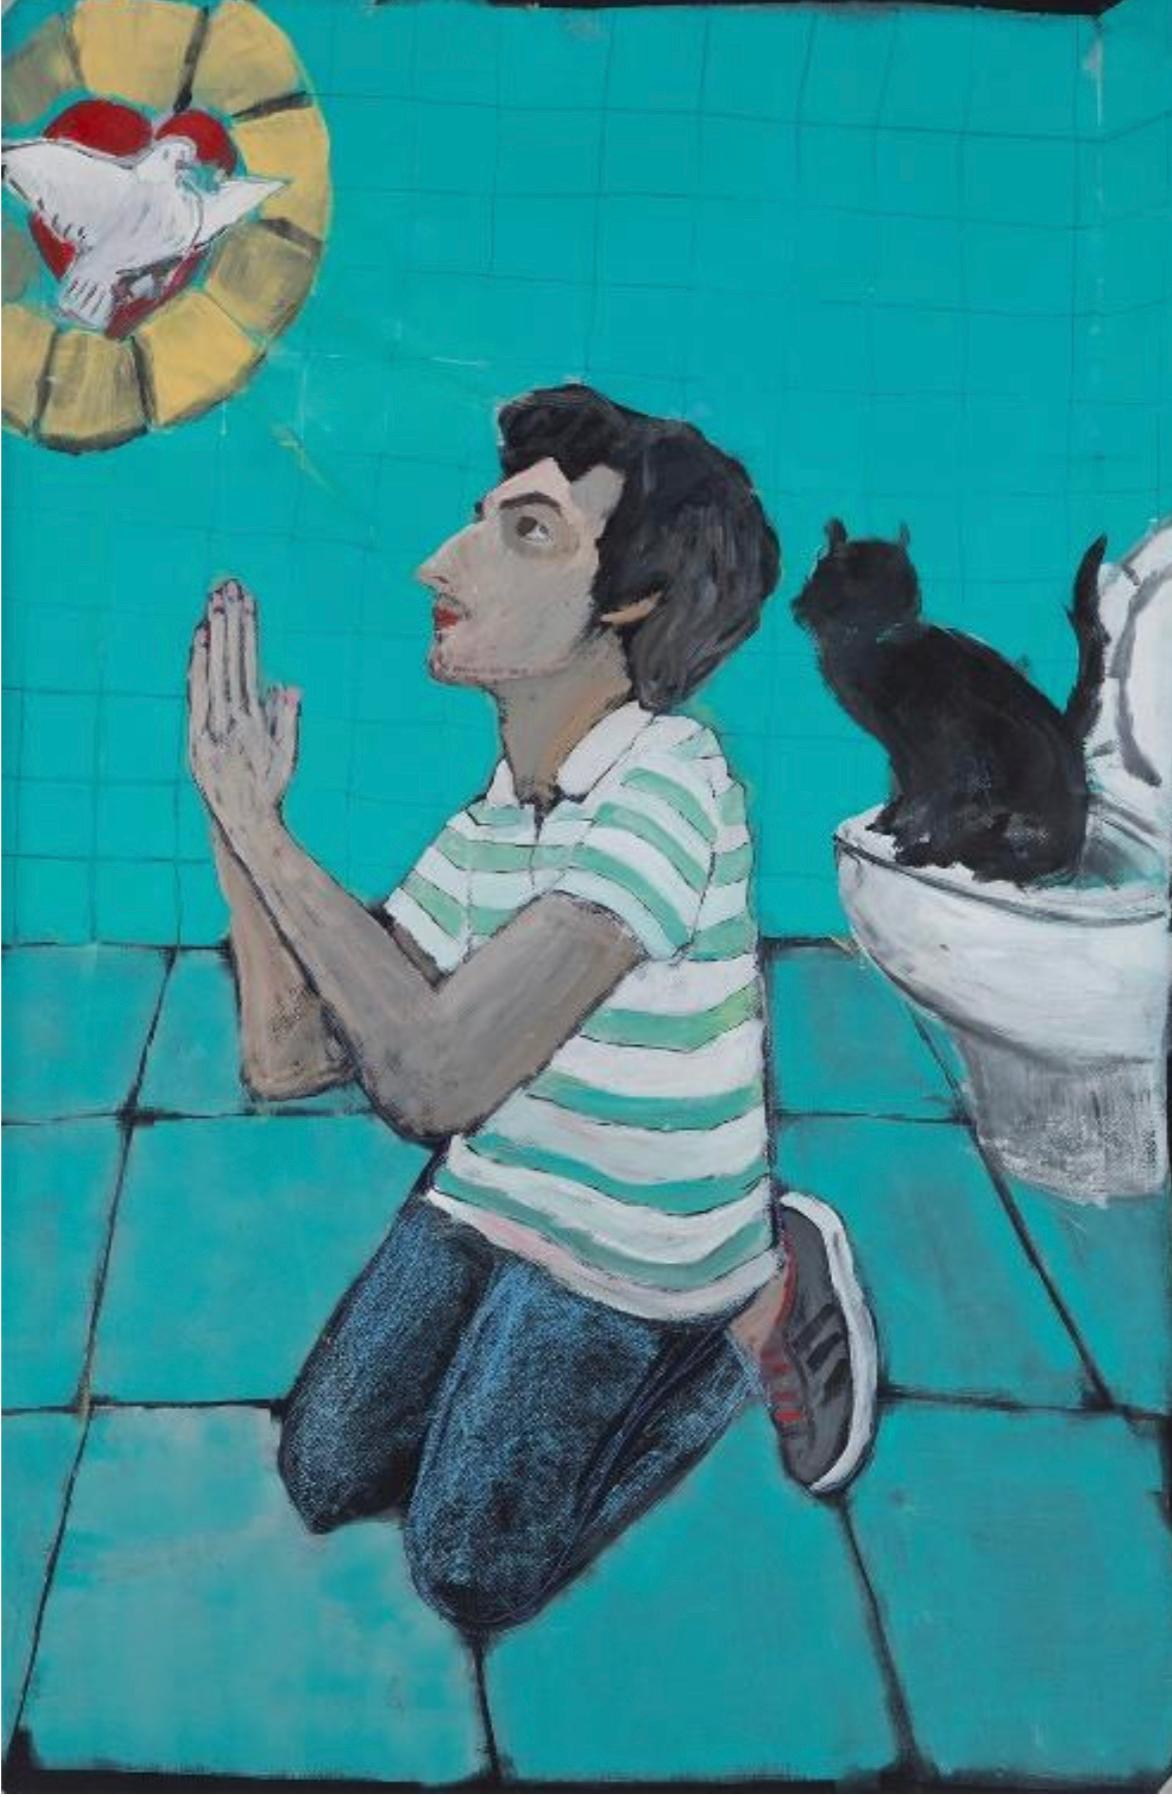 Me Praying to the Holy Gost While the Cat Shits - Painting by Diogo Barros Pires